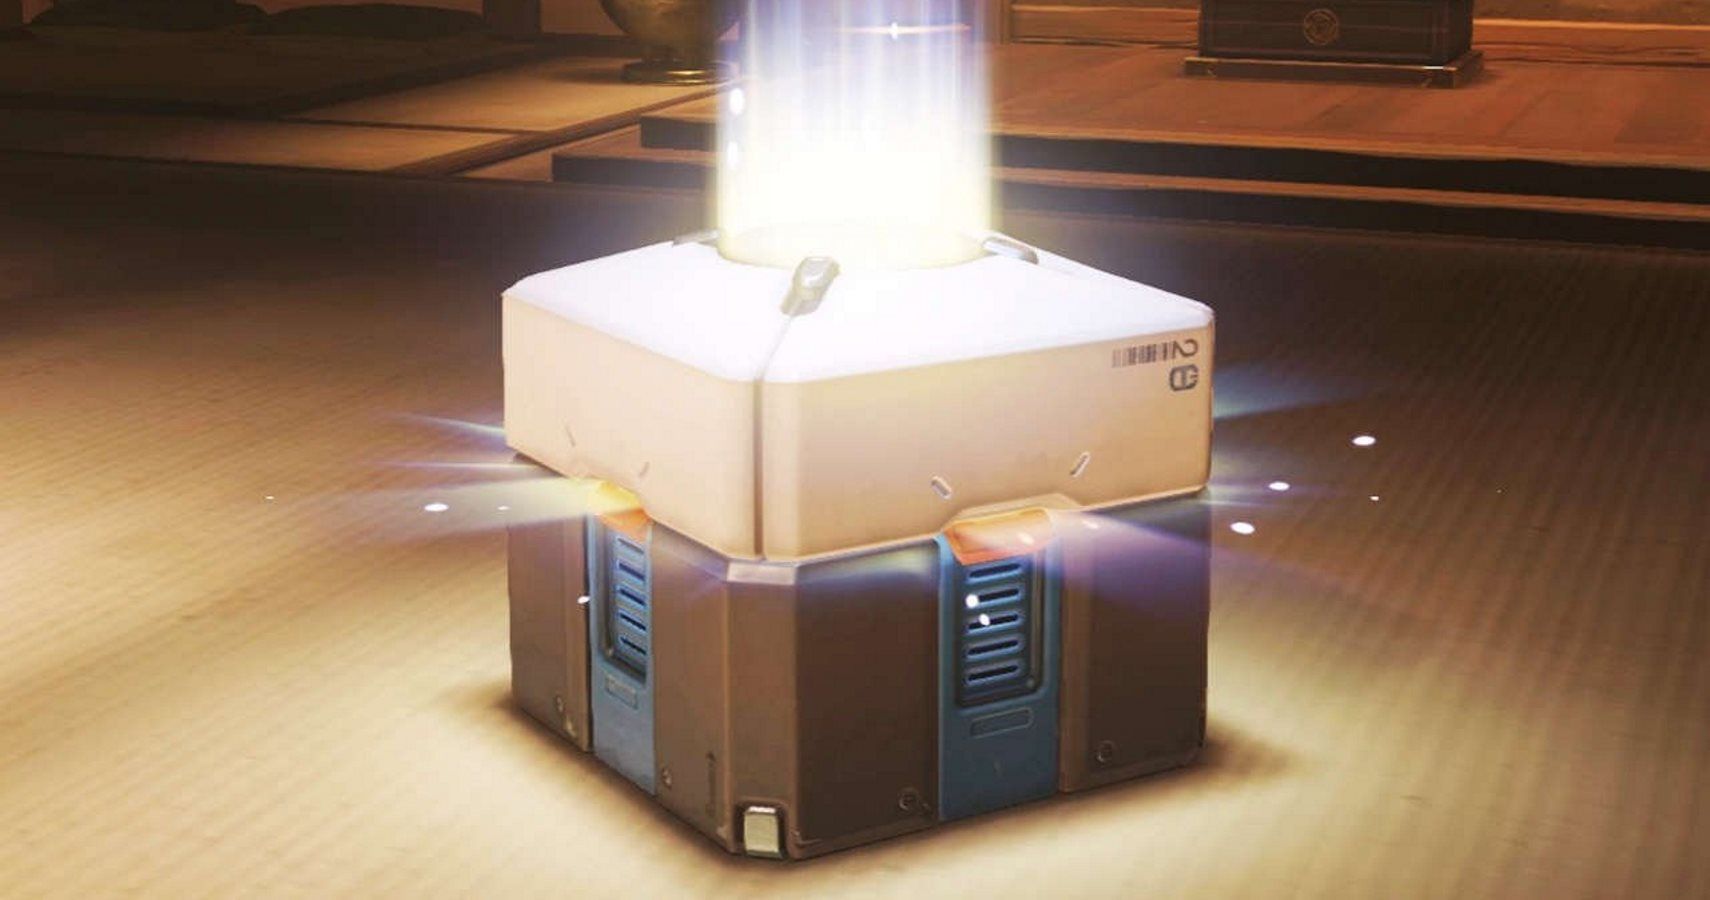 Belgium Declares Loot Boxes  And Therefore Games Like Overwatch  Illegal